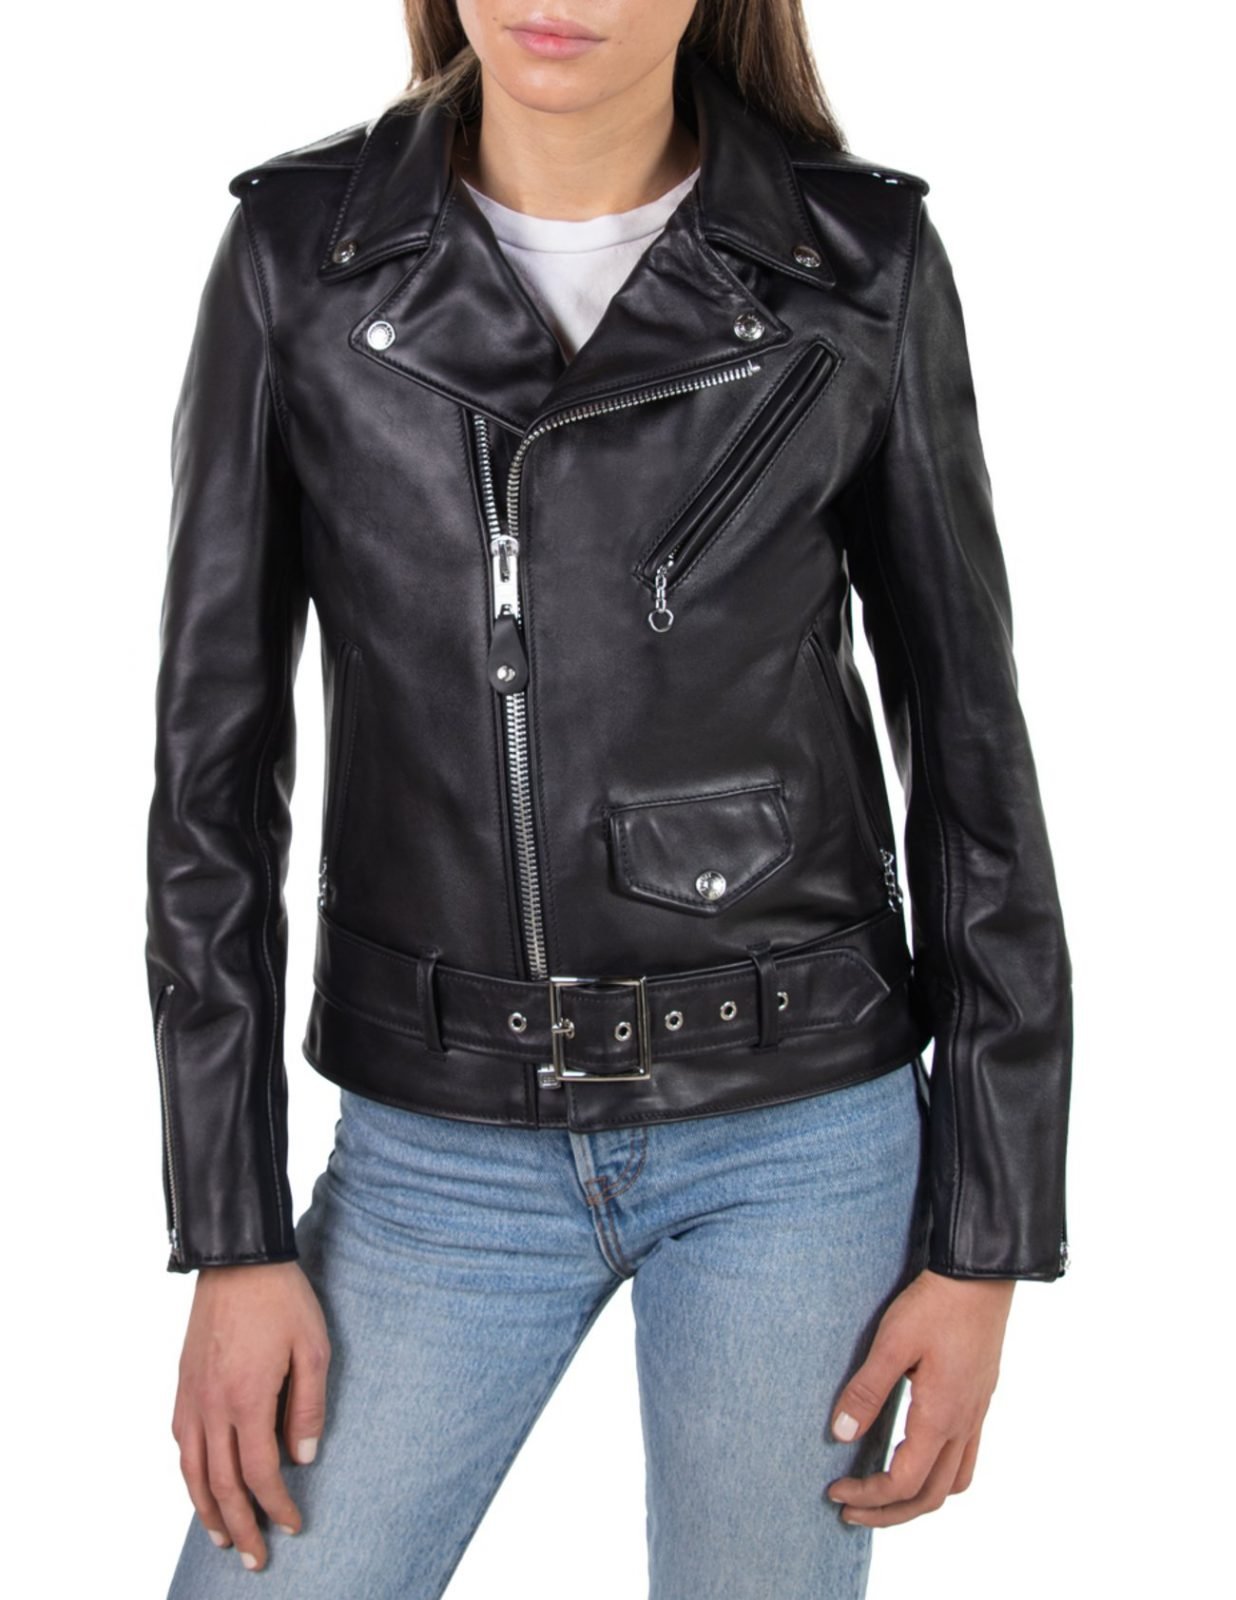 Azai Motorcycle Jacket with Buckles | Best Quality Genuine Leather ...